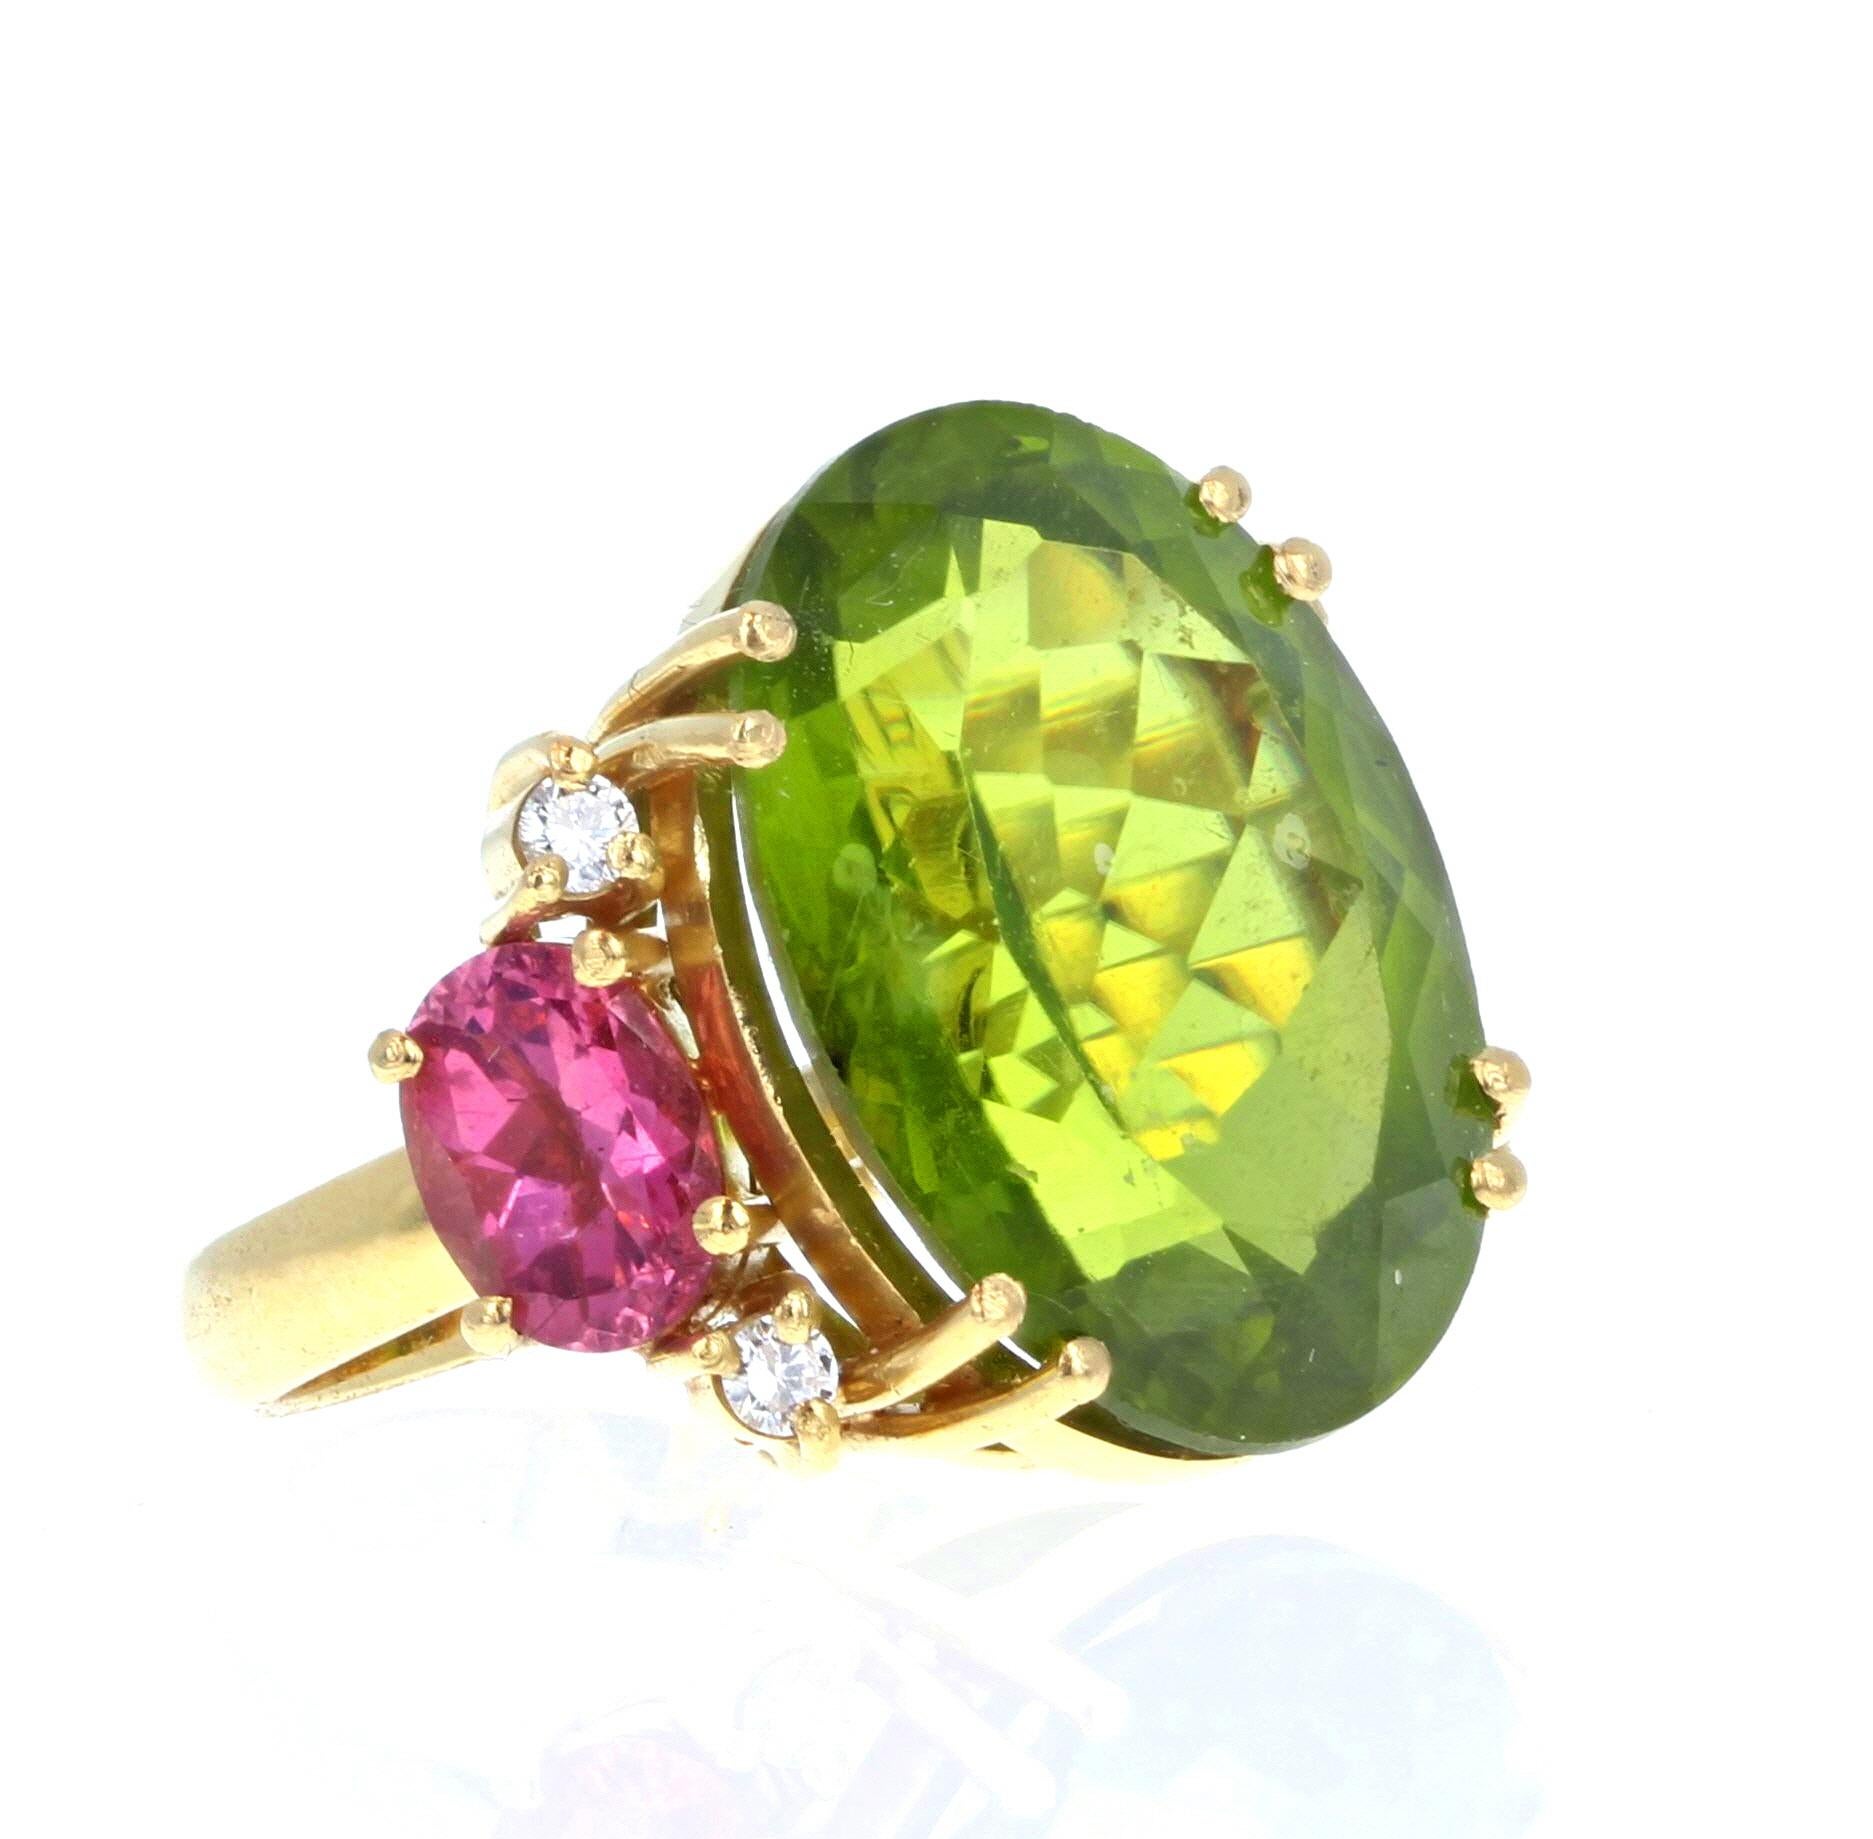 AJD Magnificent Brilliant 14 Ct Green&Pink Tourmalines, Diamonds 18Kt Gold Ring For Sale 2